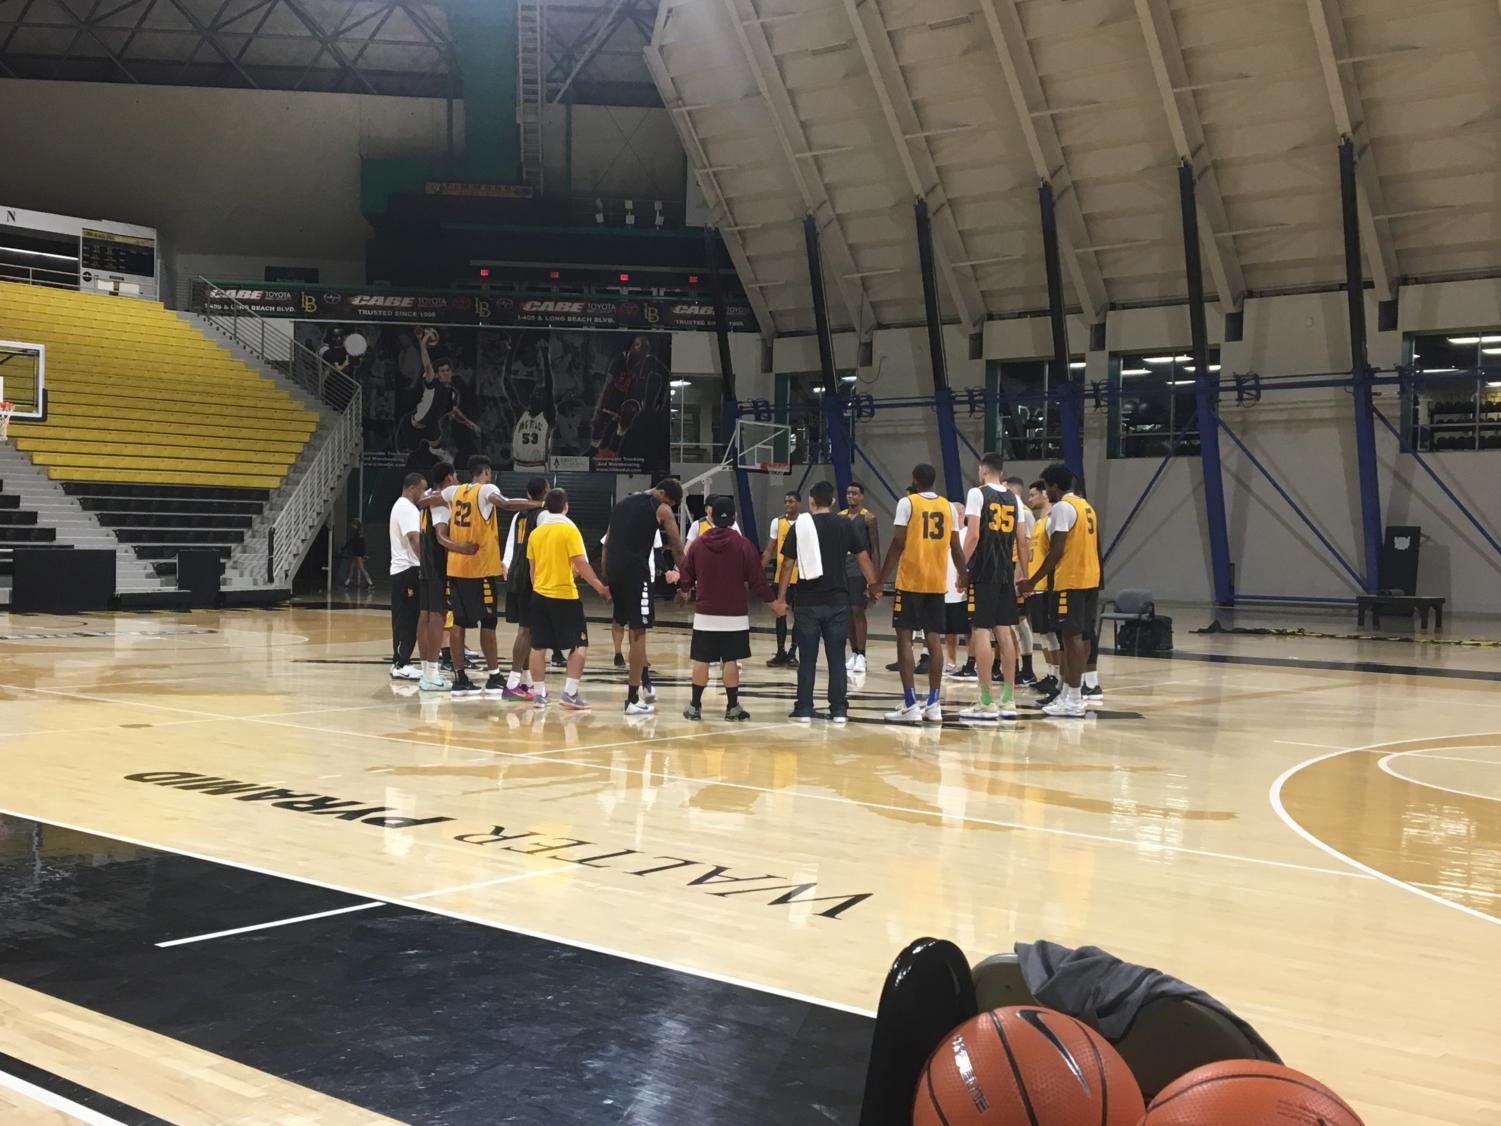 The Long Beach State men’s basketball team huddles together after practice Wednesday morning.